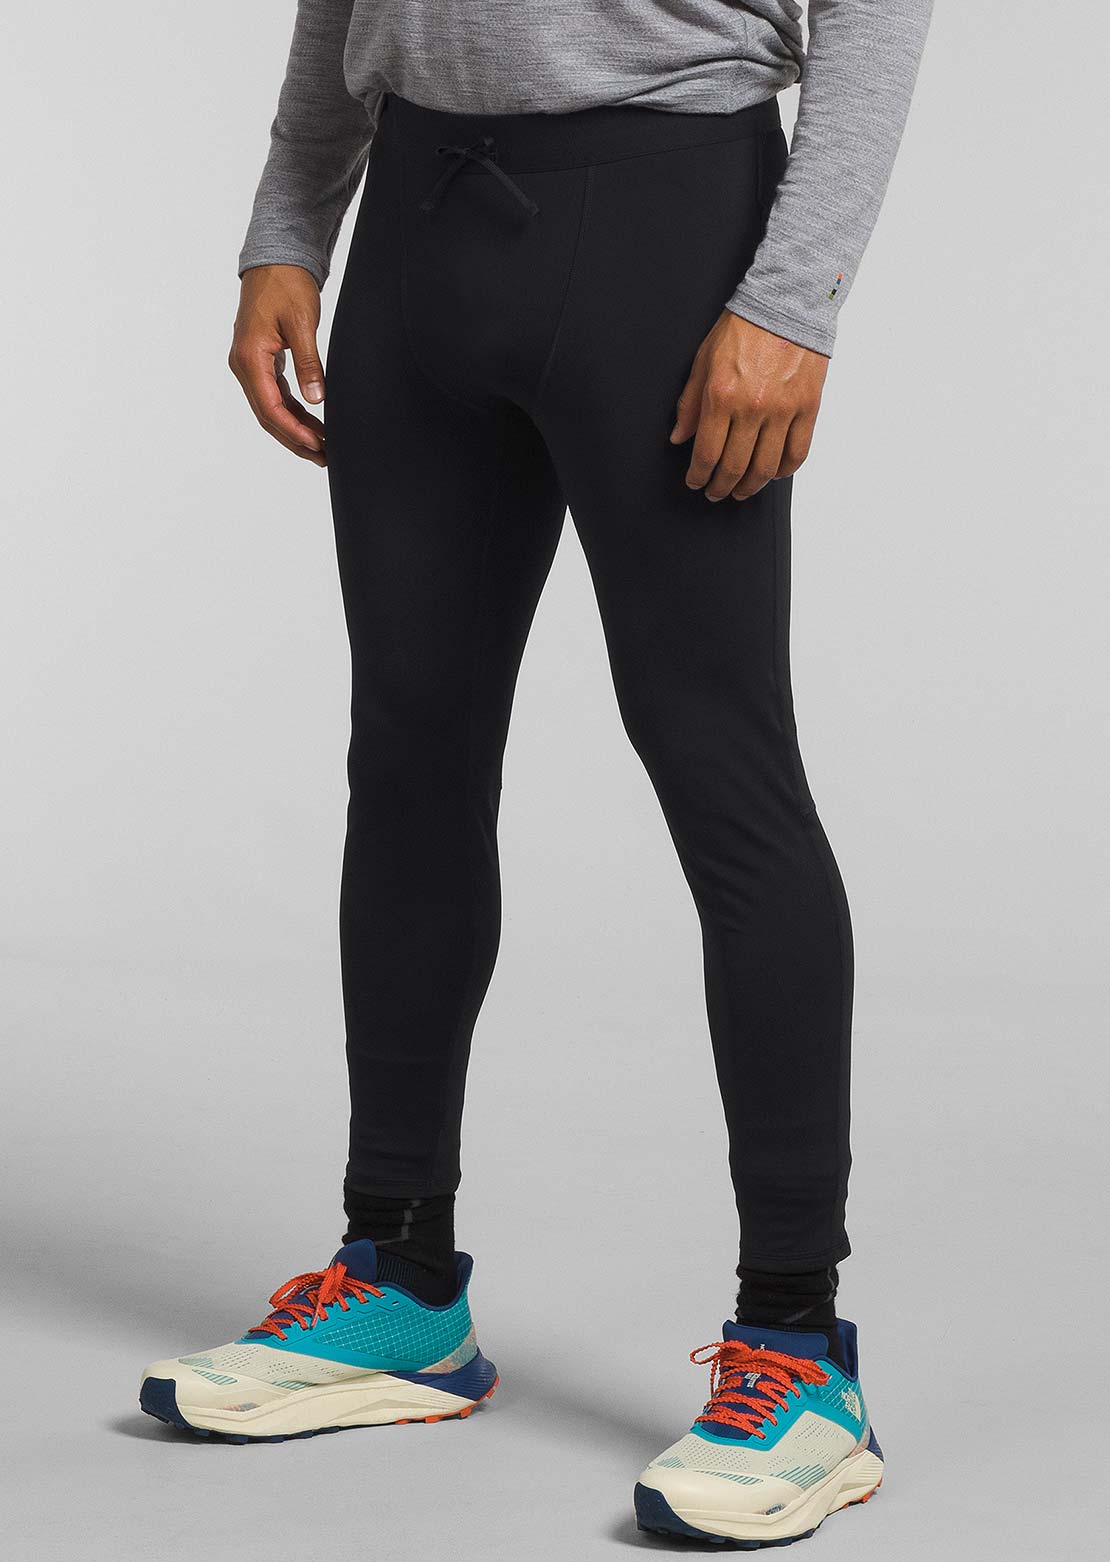 The North Face Black Winter Warm Leggings The North Face